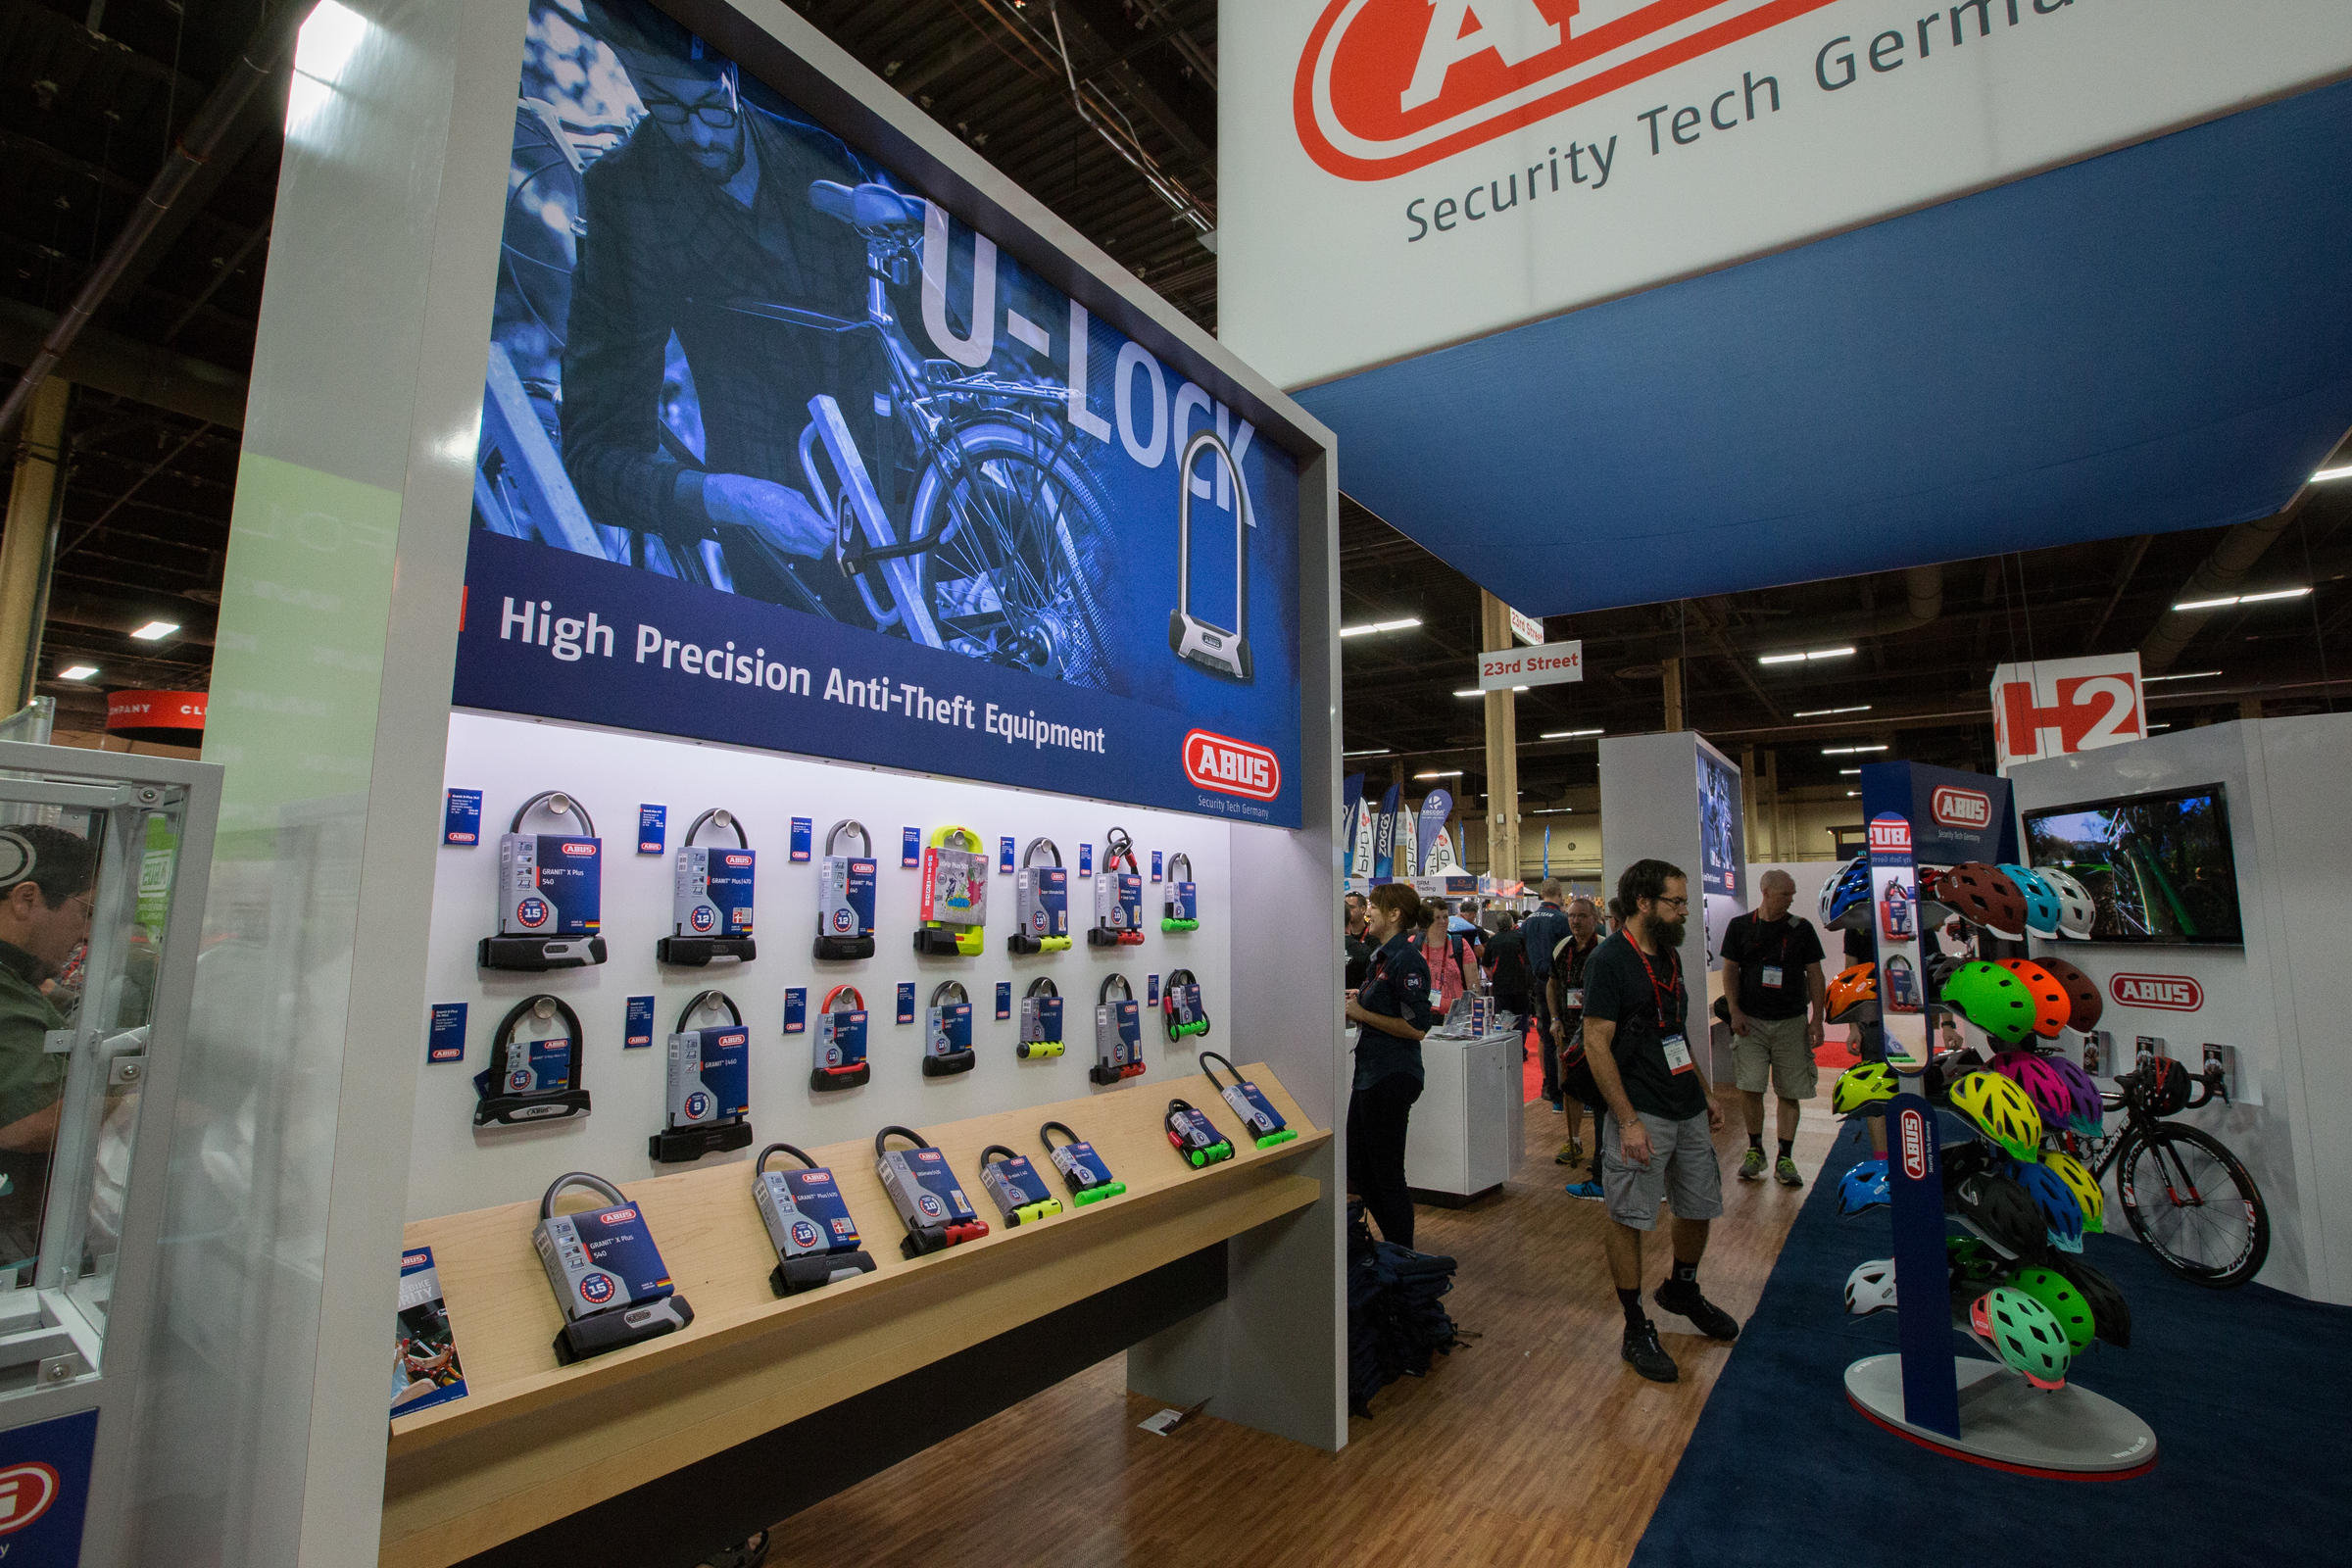 Design and Production of Stunning Trade Show Graphics for Translights and Product Displays at interbike 2015, held in Las Vegas NV. Photography Copyright © 2015 by Wil Matthews Photo. Used with Permission.